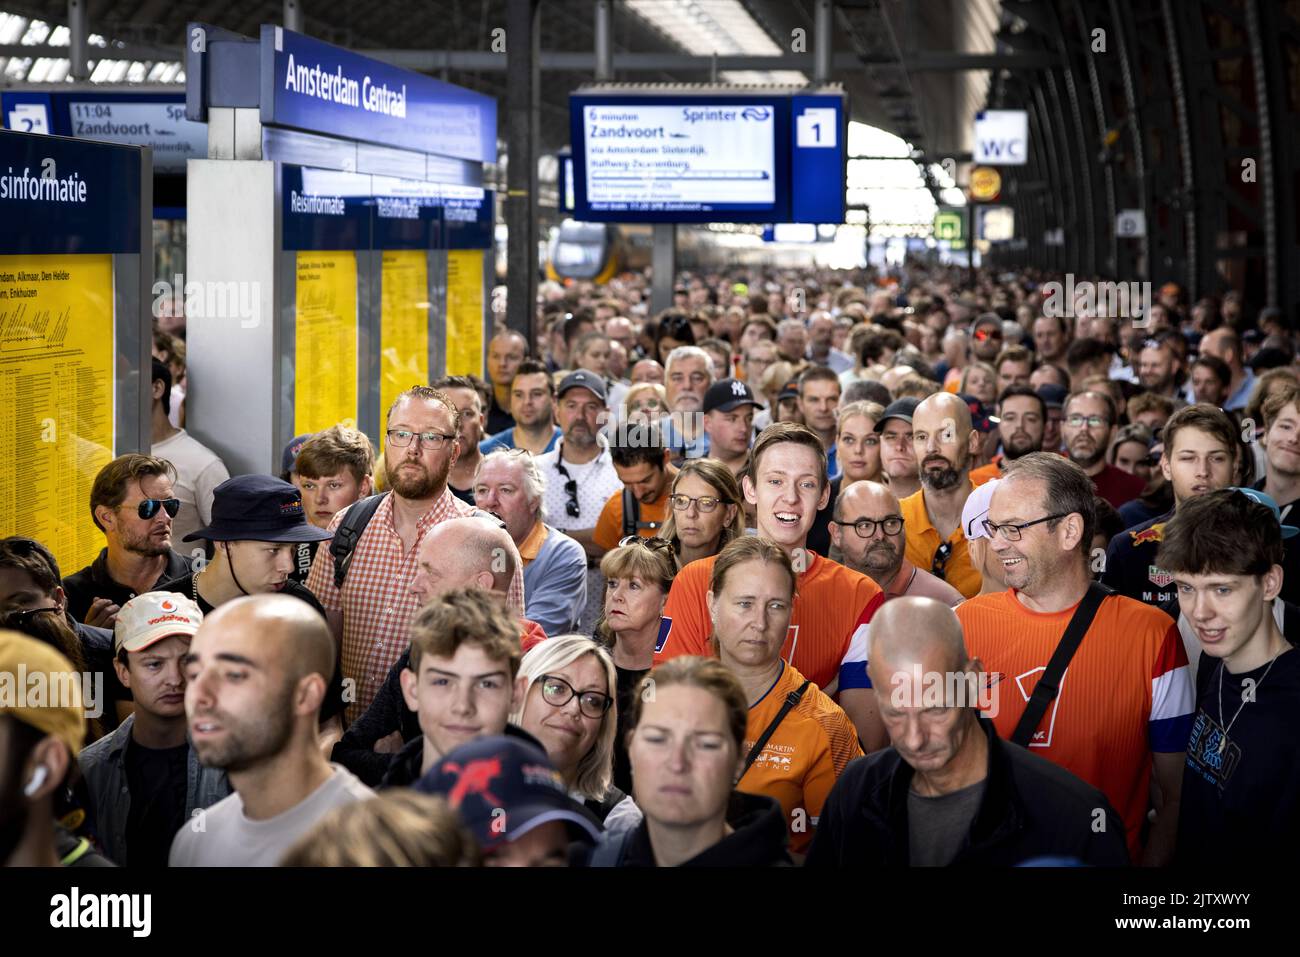 2022-09-02 11:05:30 AMSTERDAM - Amsterdam Central is busy with people who want to go to Zandvoort. That's where the Formula 1 starts. Because big crowds were expected, the NS has a train running every five minutes between Amsterdam Central and Zandvoort aan Zee station. ANP RAMON VAN FLYMEN netherlands out - belgium out Stock Photo